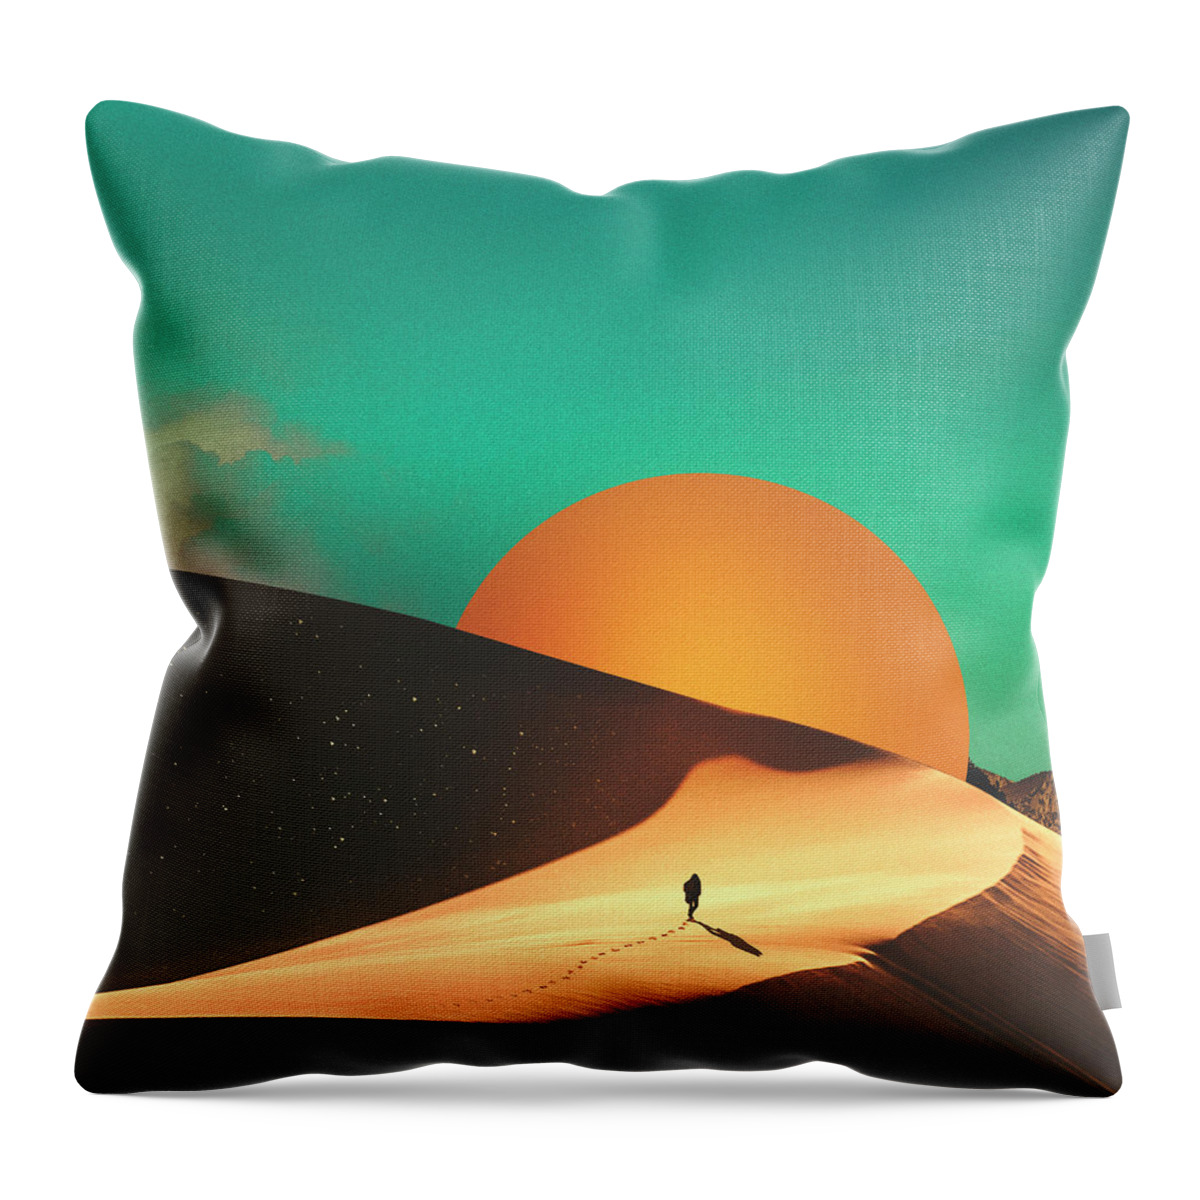 Collage Throw Pillow featuring the digital art Thrist by Fran Rodriguez